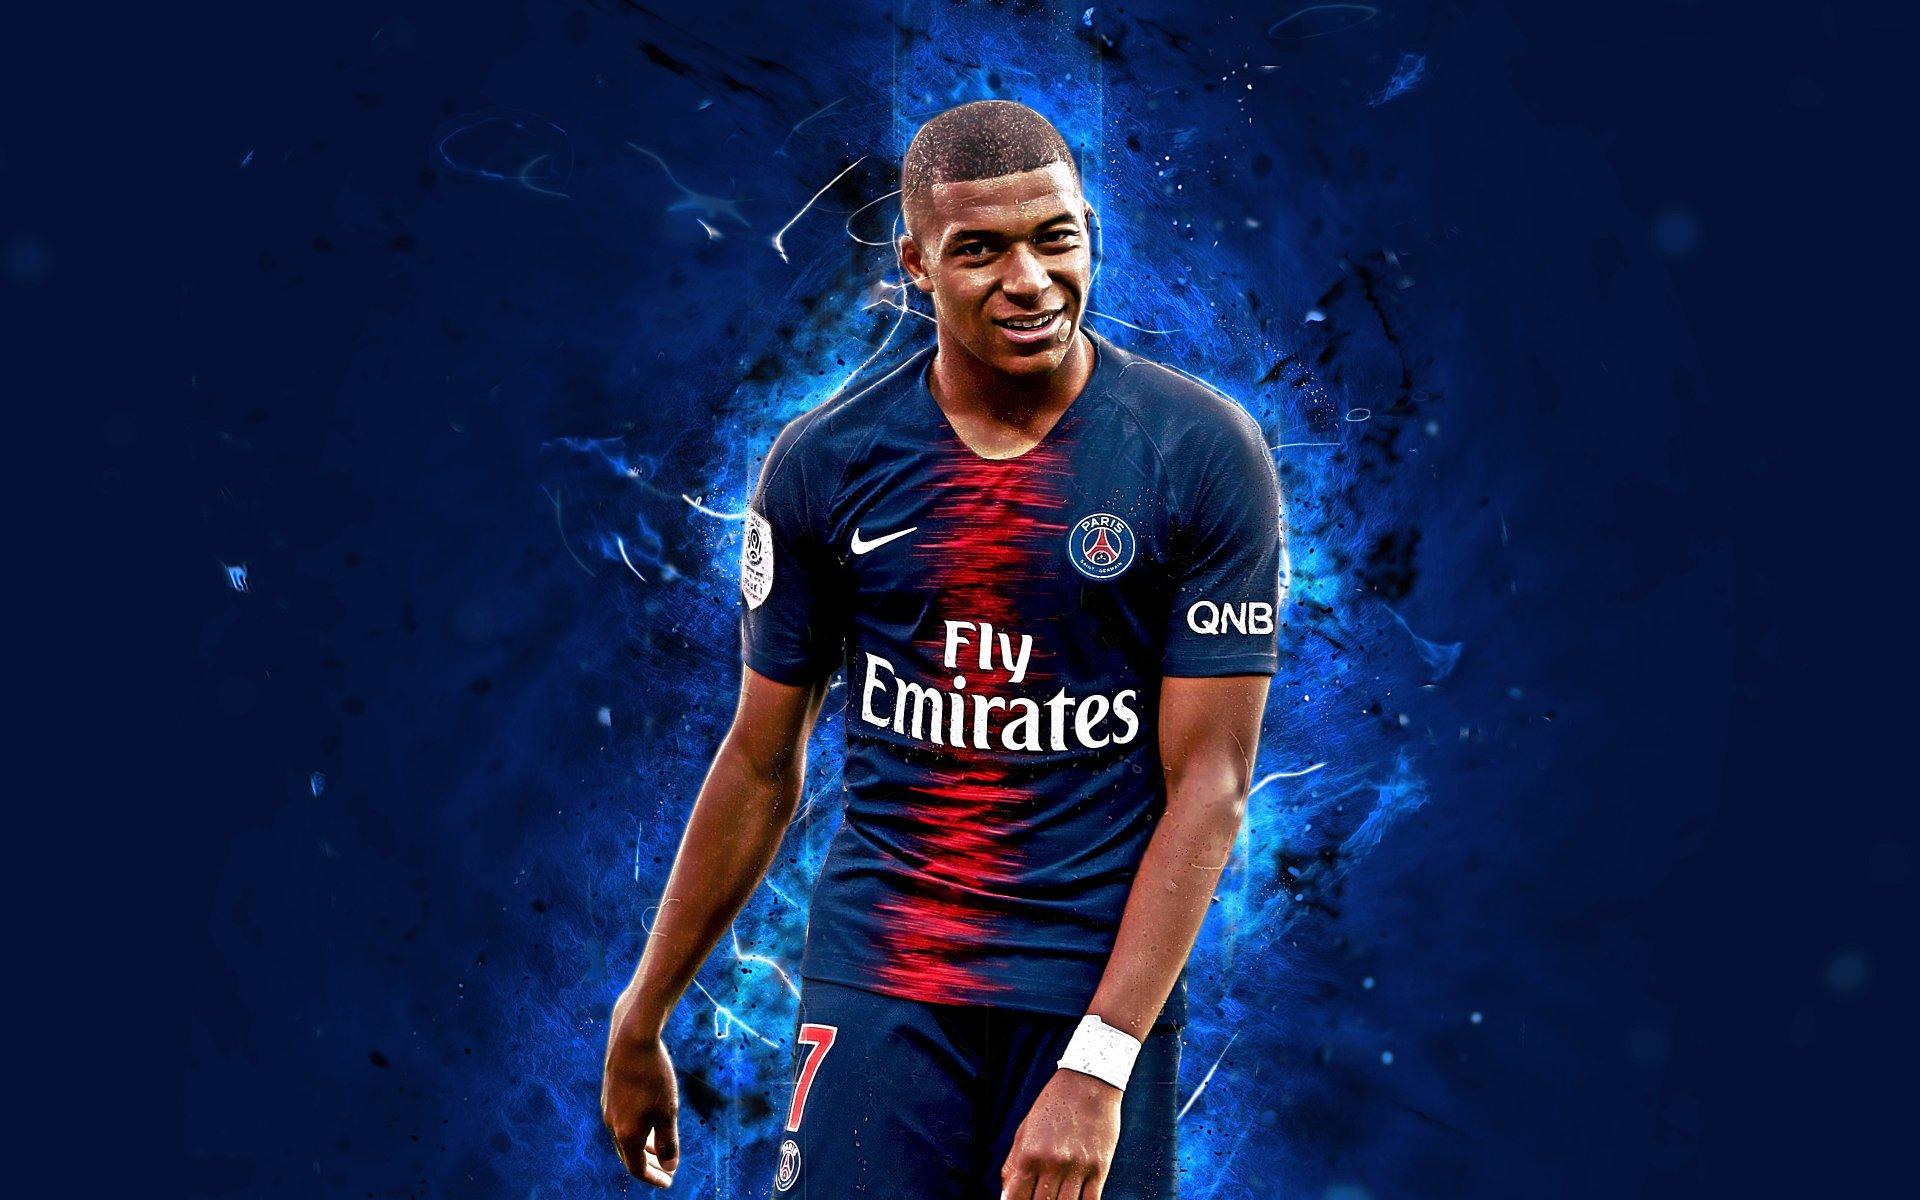 Kylian mbappe young player of France national team and Paris SaintGermain  team 4K wallpaper download